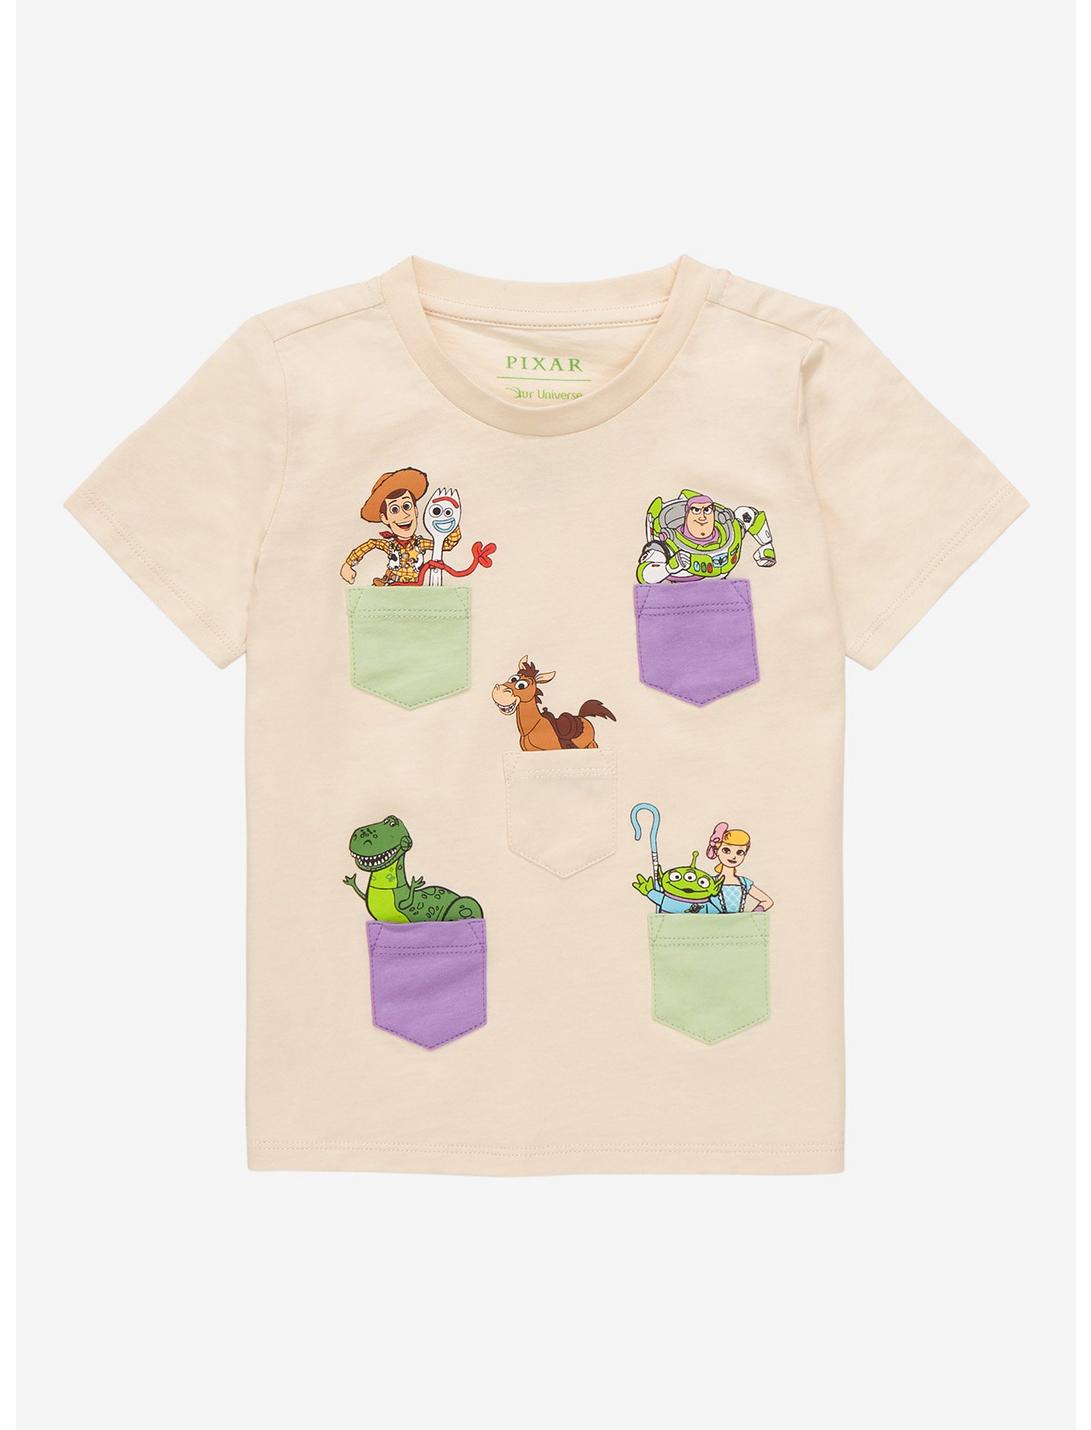 Our Universe Disney Pixar Toy Story 4 Characters Toddler Multi-Pocket T-Shirt - BoxLunch Exclusive, MULTI, hi-res